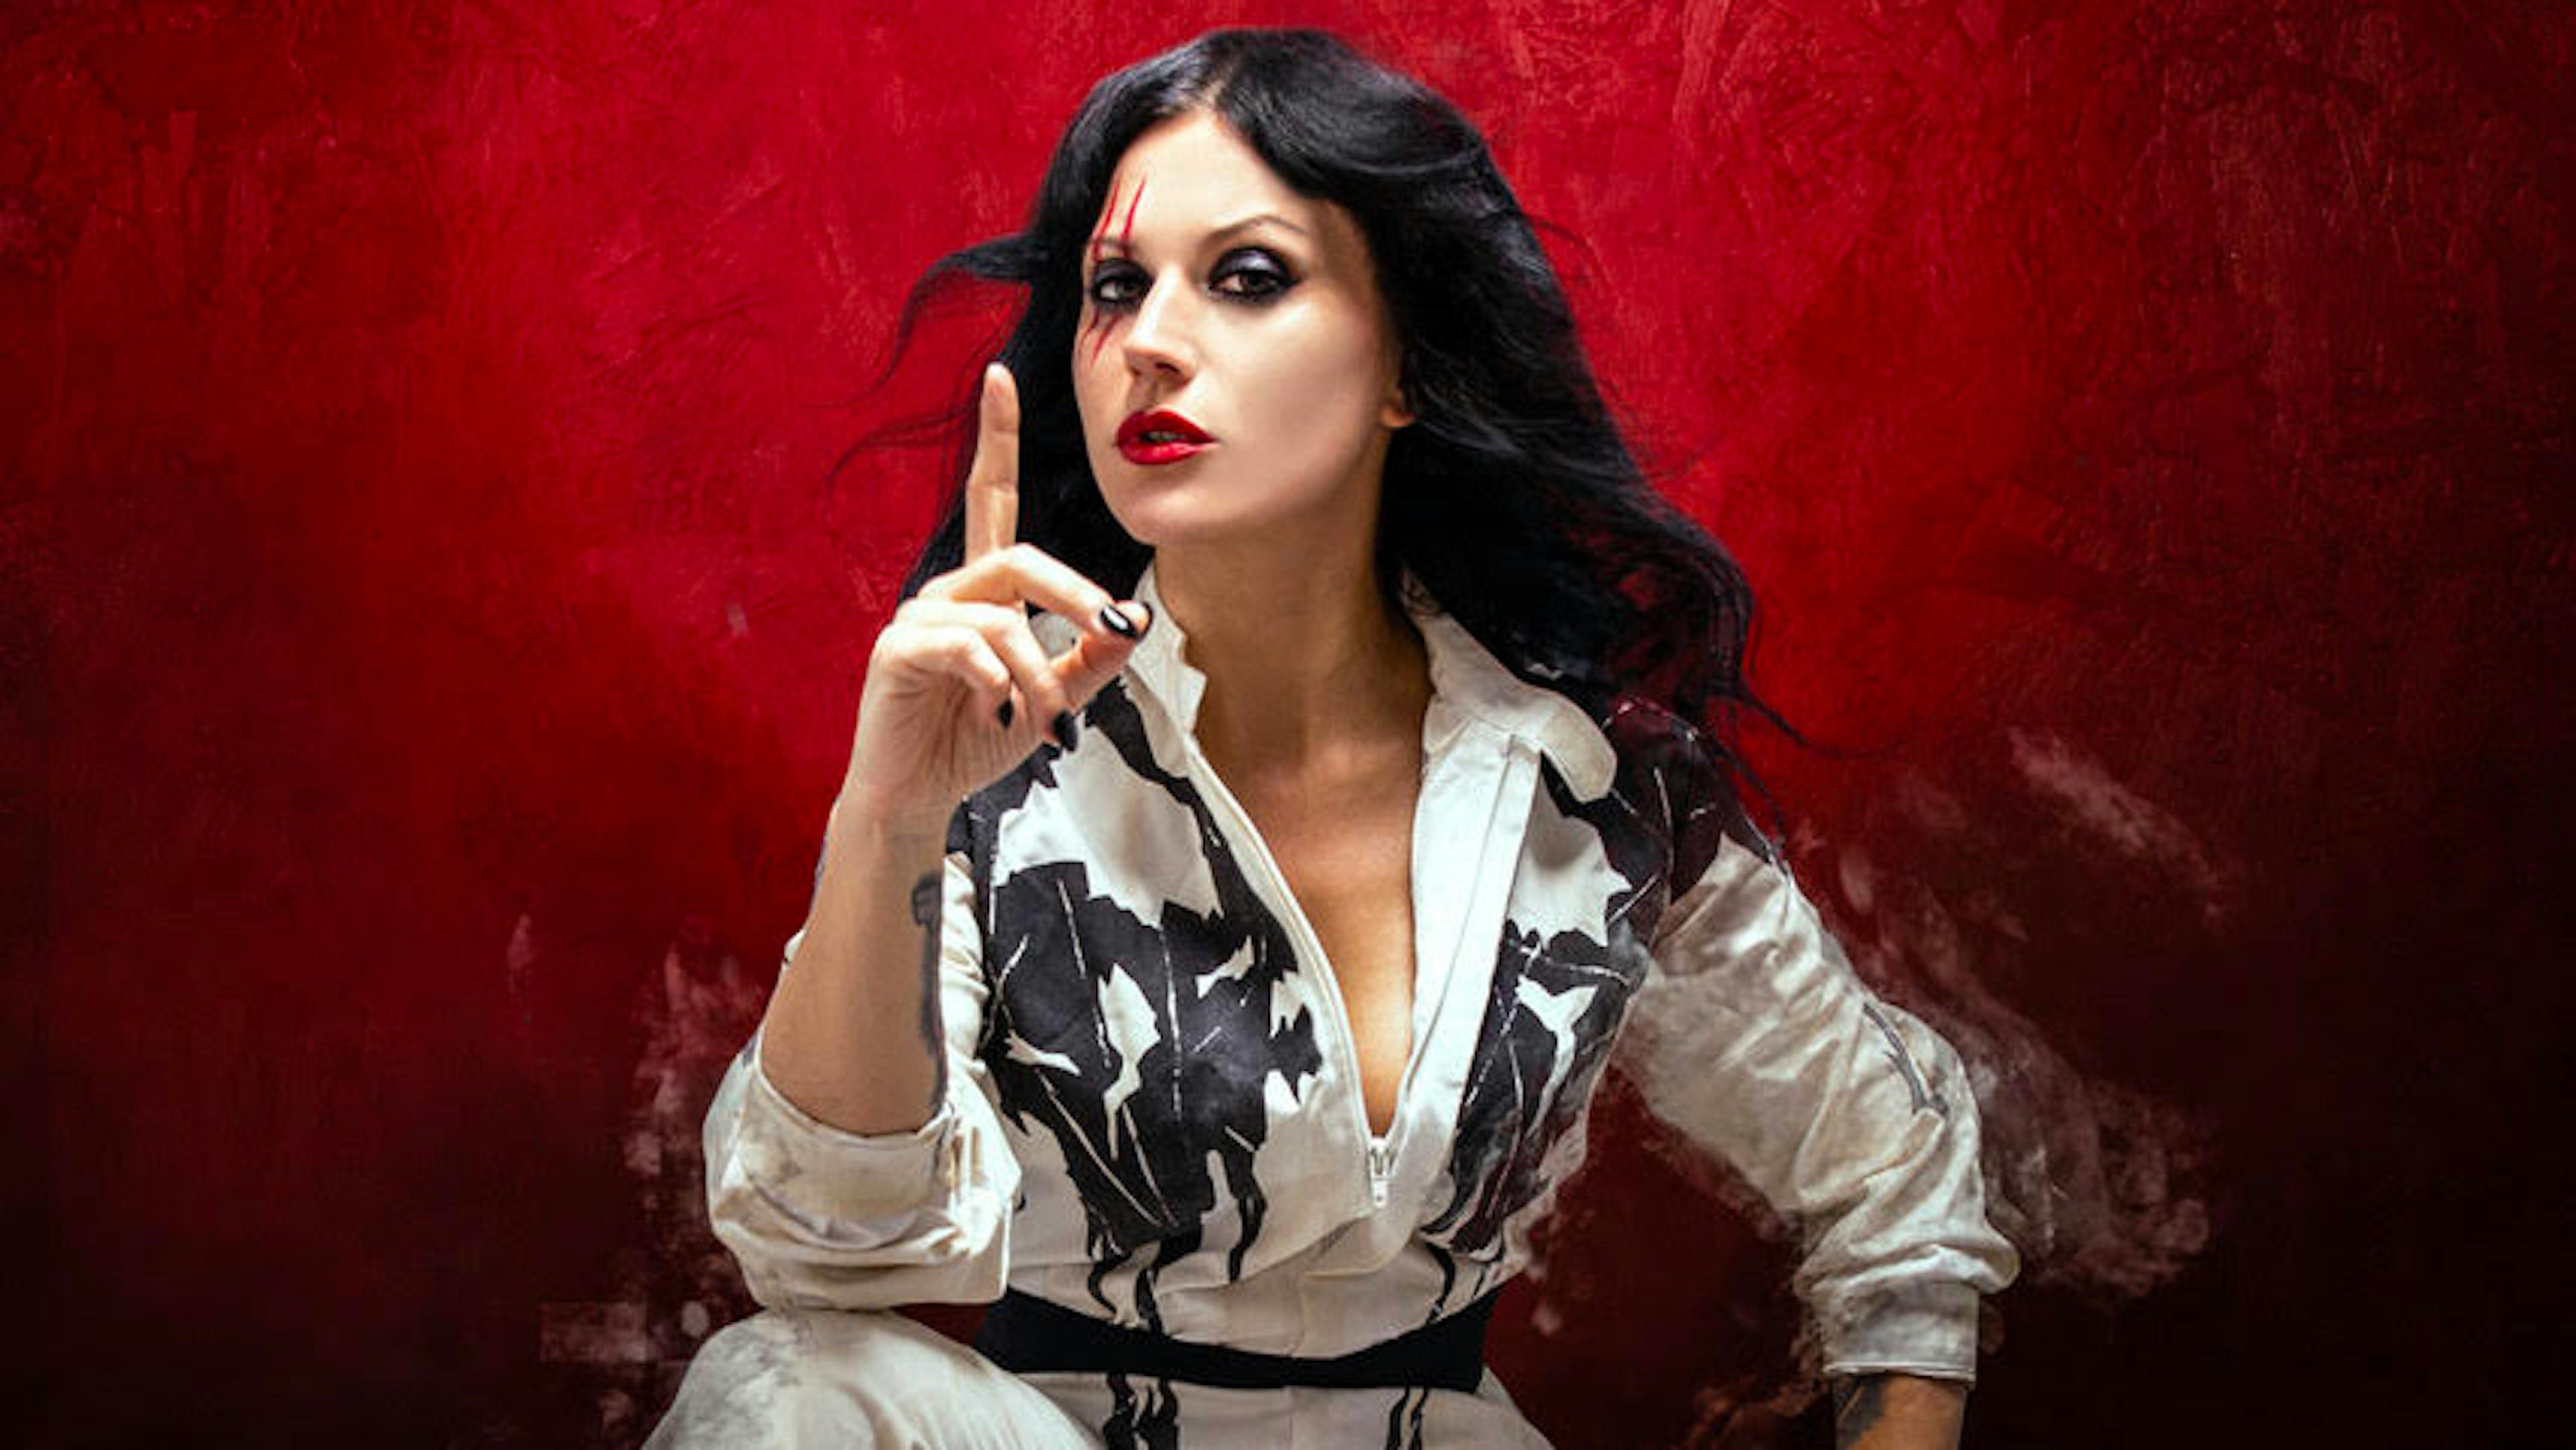 Cristina Scabbia: “We need to stop looking at each other and start looking towards the same direction, together”